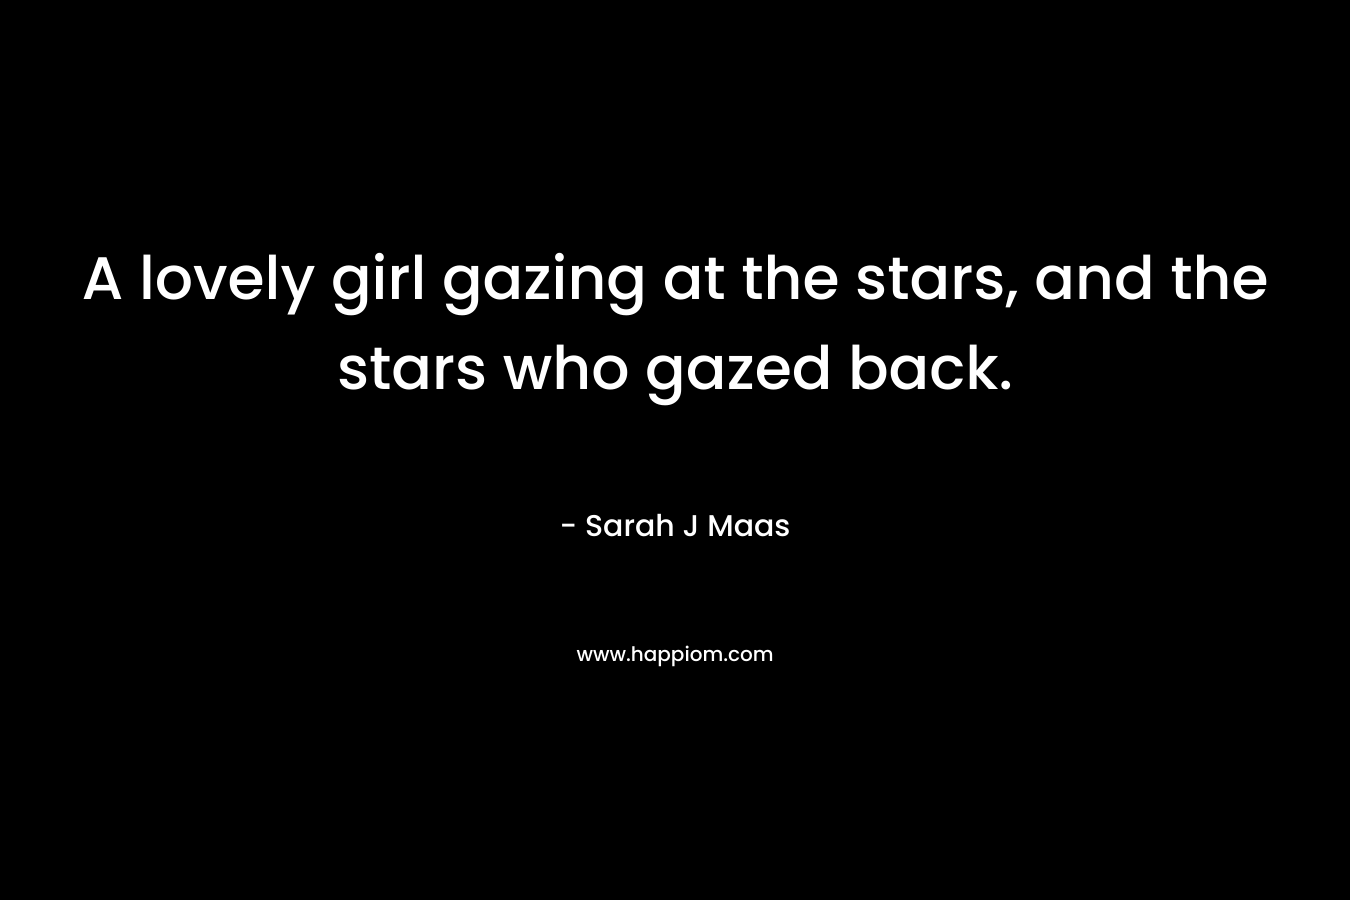 A lovely girl gazing at the stars, and the stars who gazed back. – Sarah J Maas